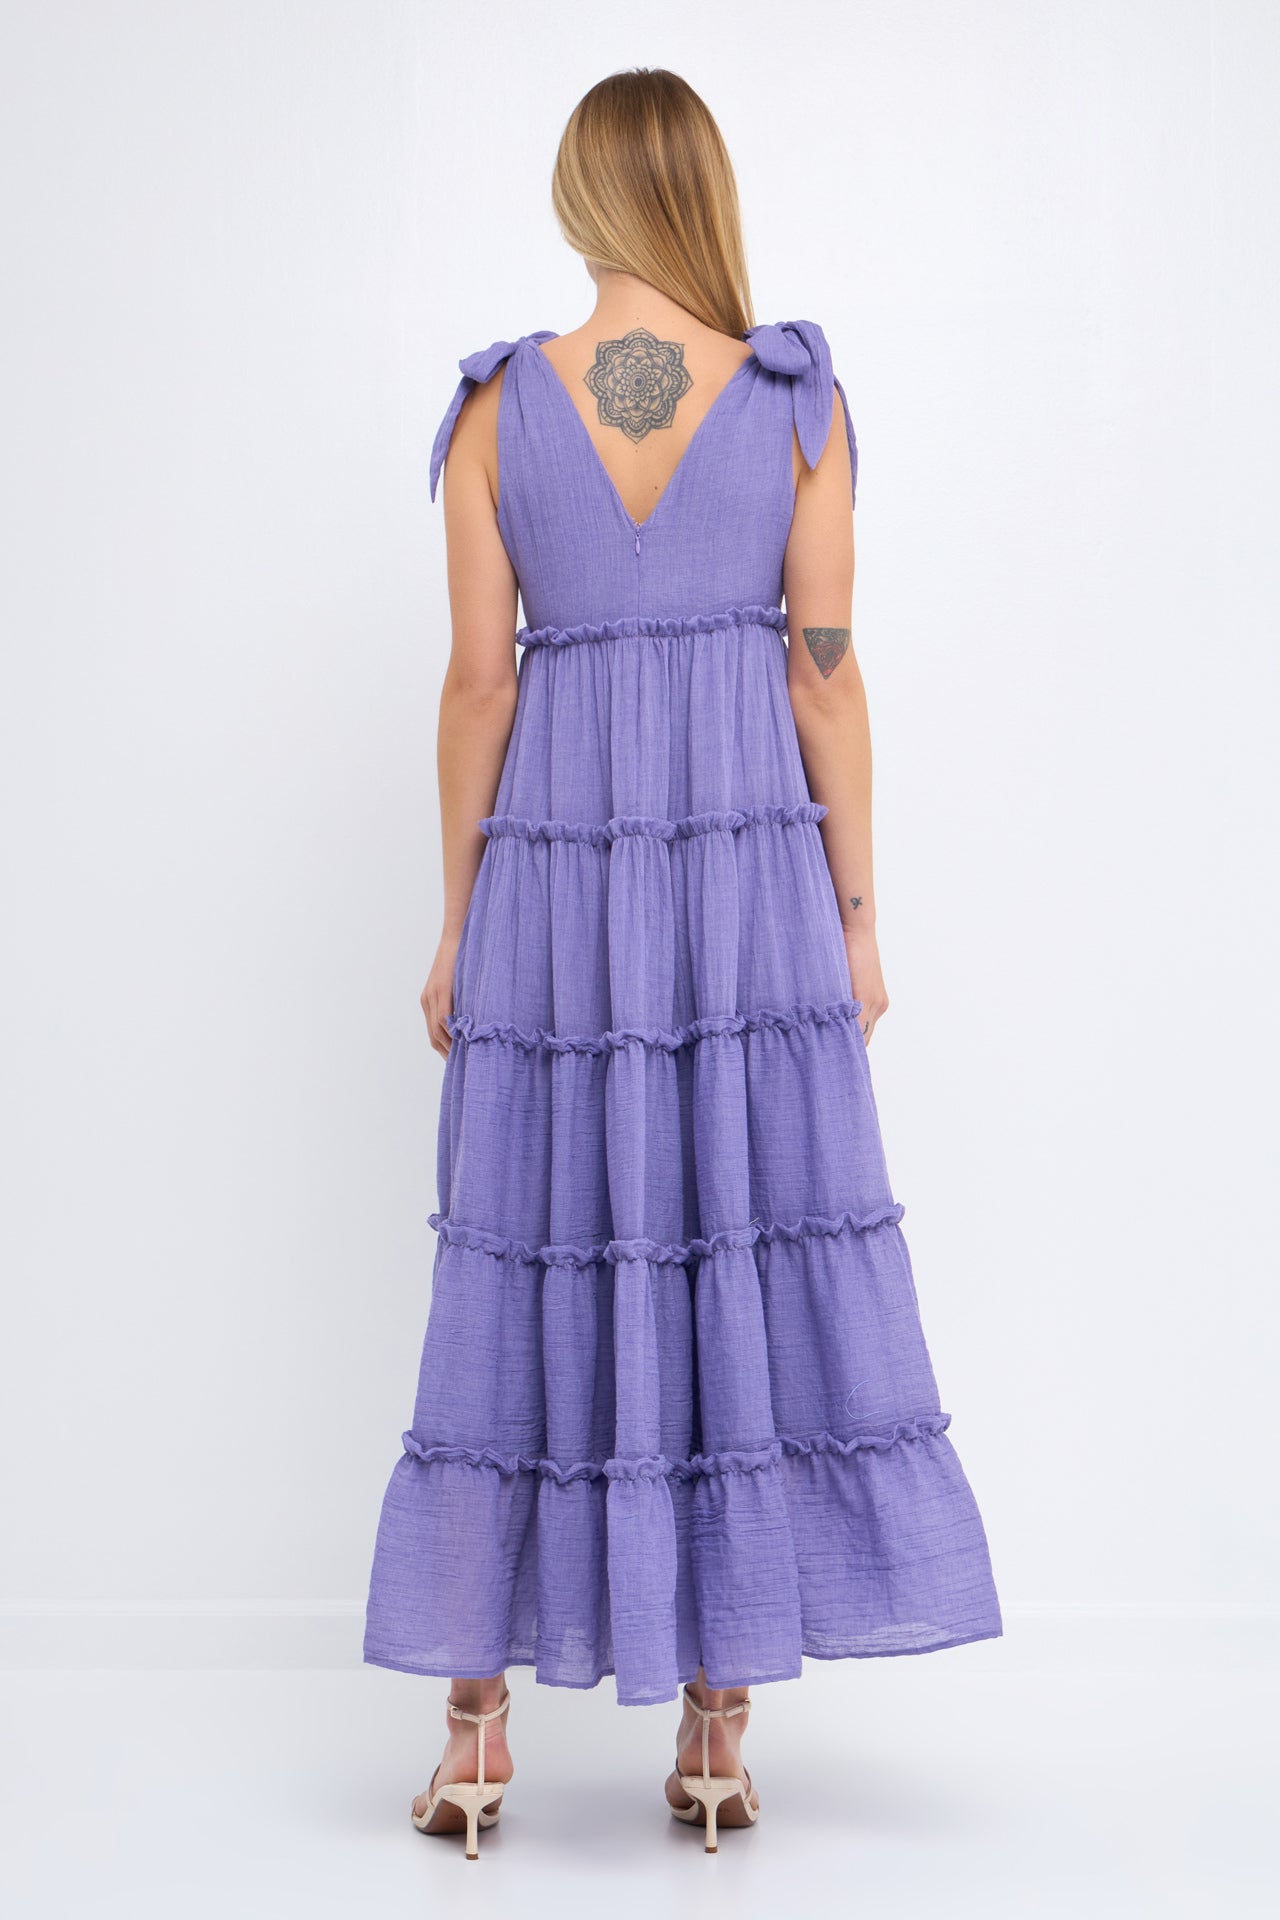 FREE THE ROSES - Tiered Maxi Dress - DRESSES available at Objectrare